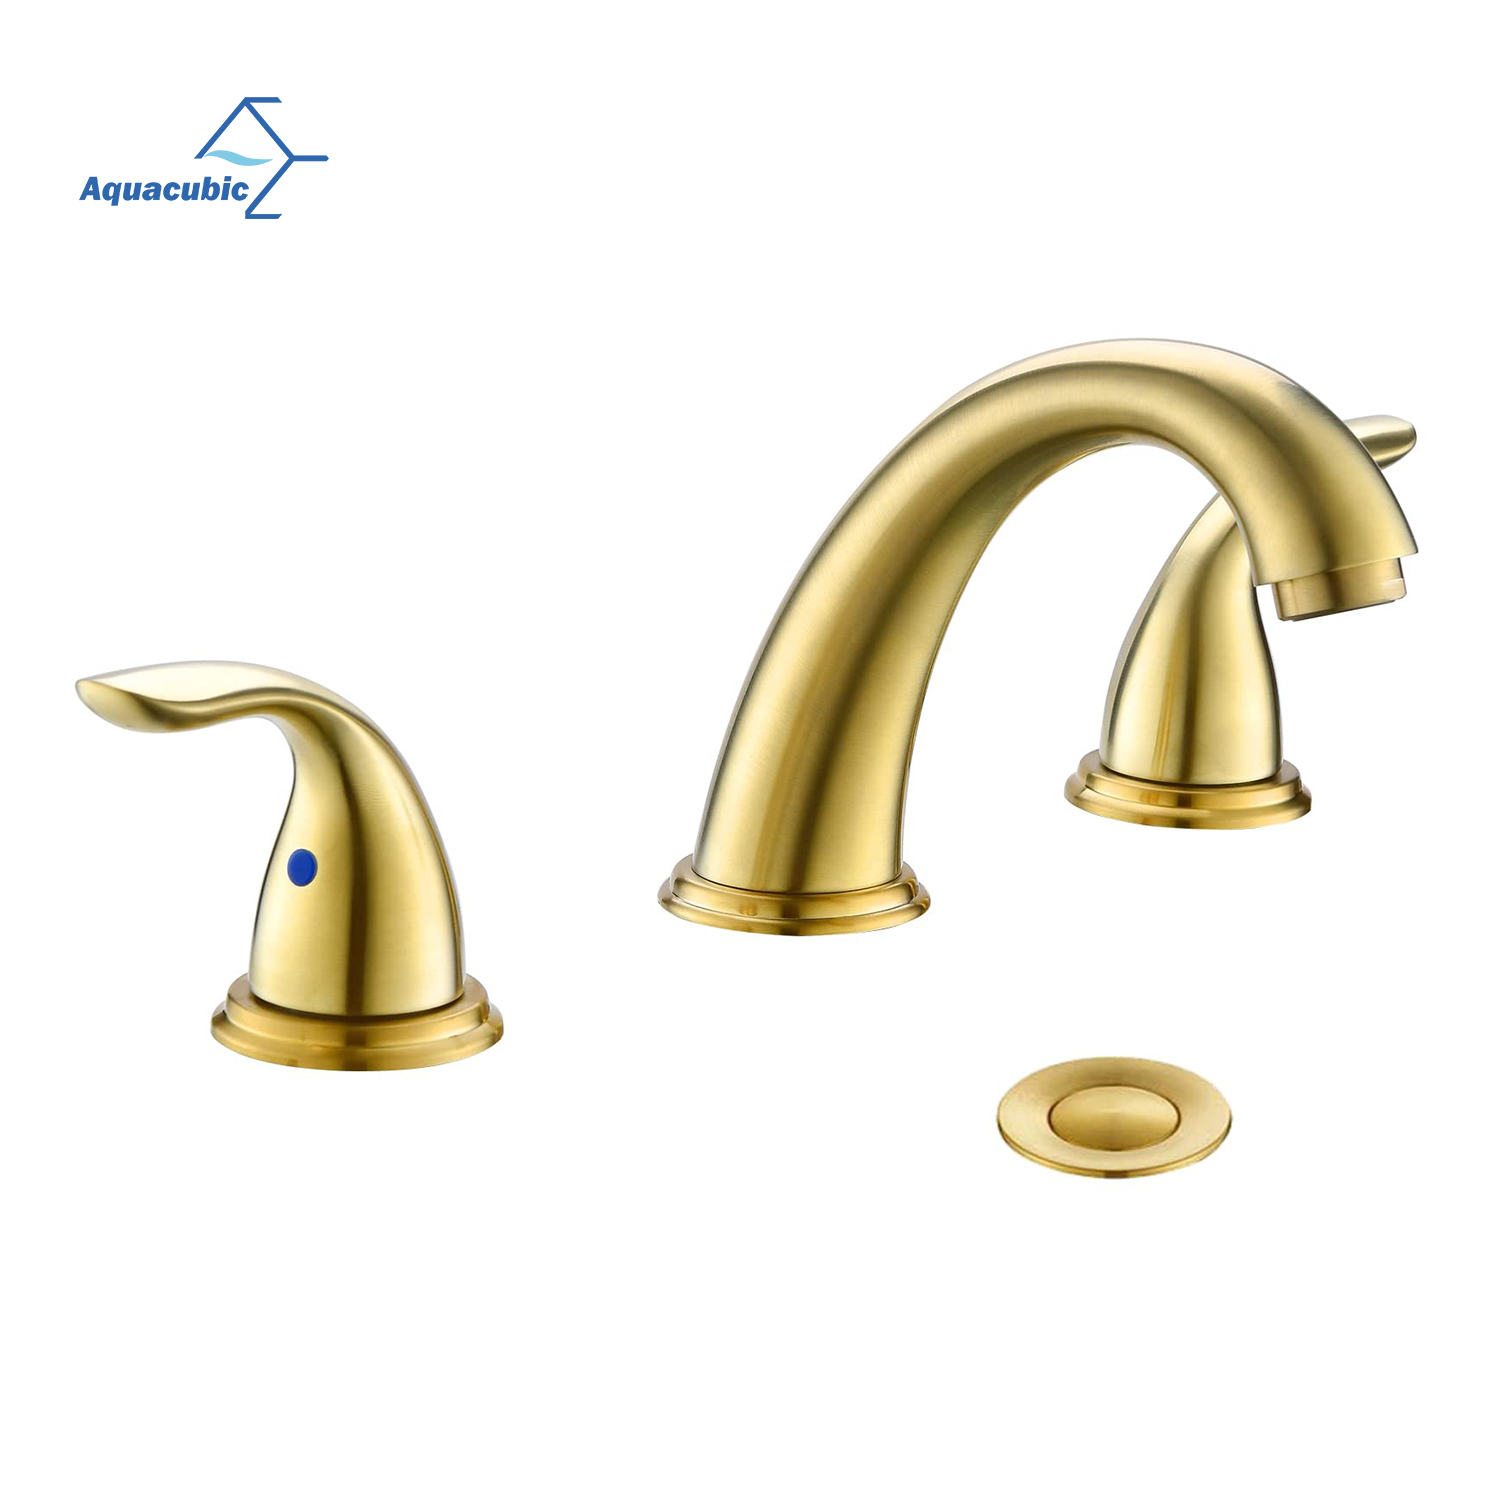 Aquacubic Widespread Brushed Gold Fancy American Style Dual Handle Three Hole Bathroom Basin Tap Lavatory Faucet